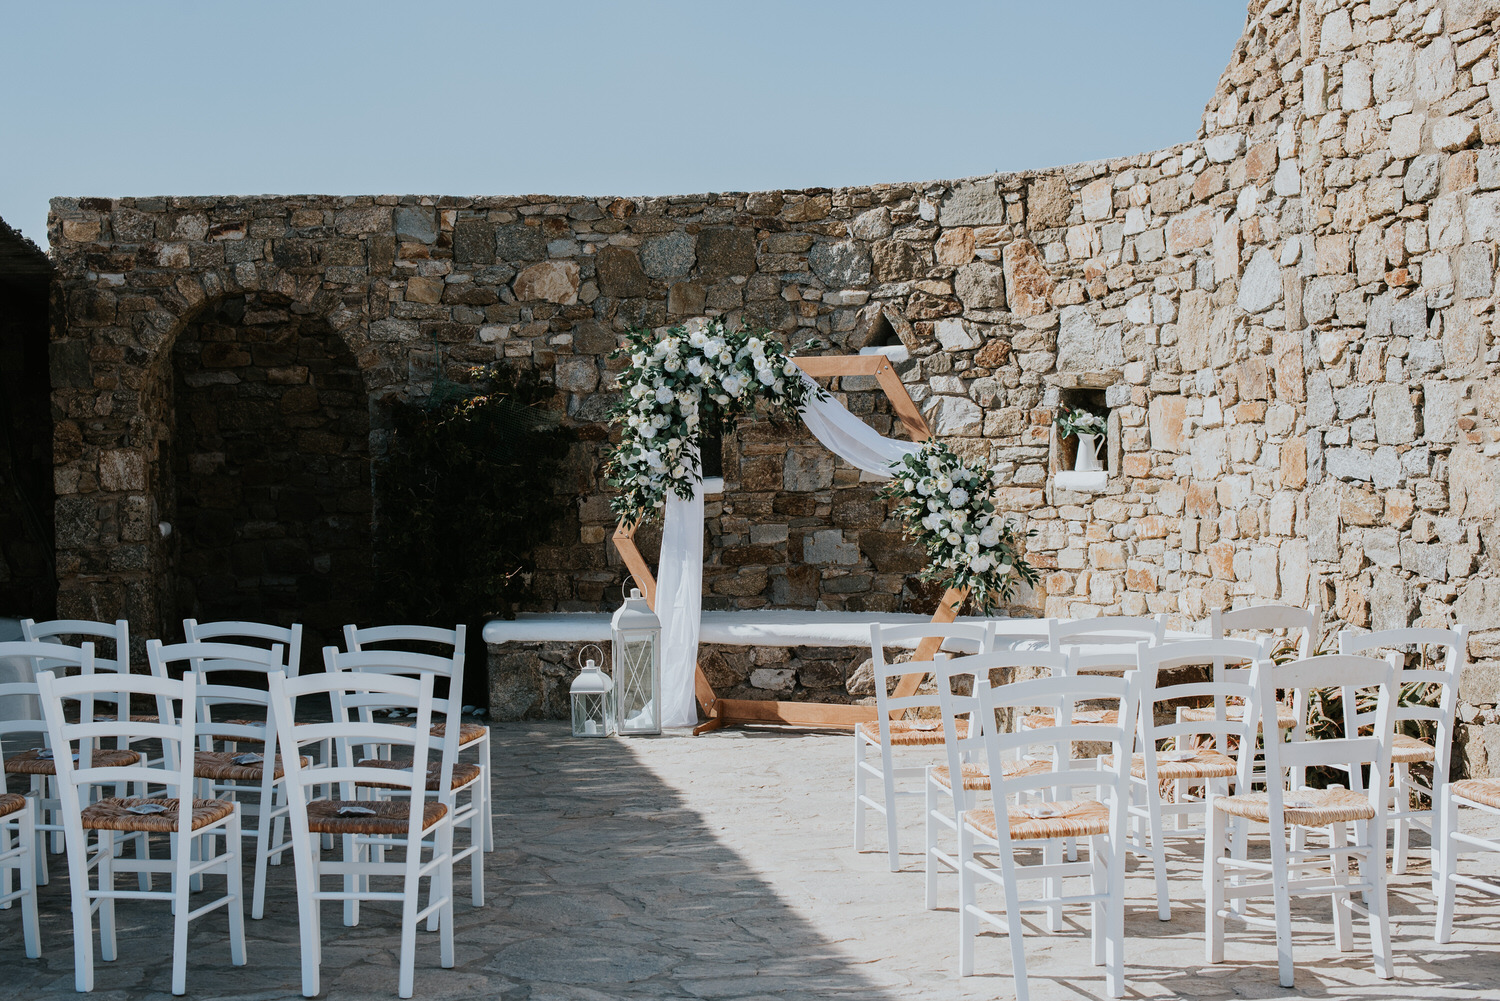 Mykonos wedding photographer: panoramic photo of the wedding ceremony terrace and the floral arch against the rocky wall.